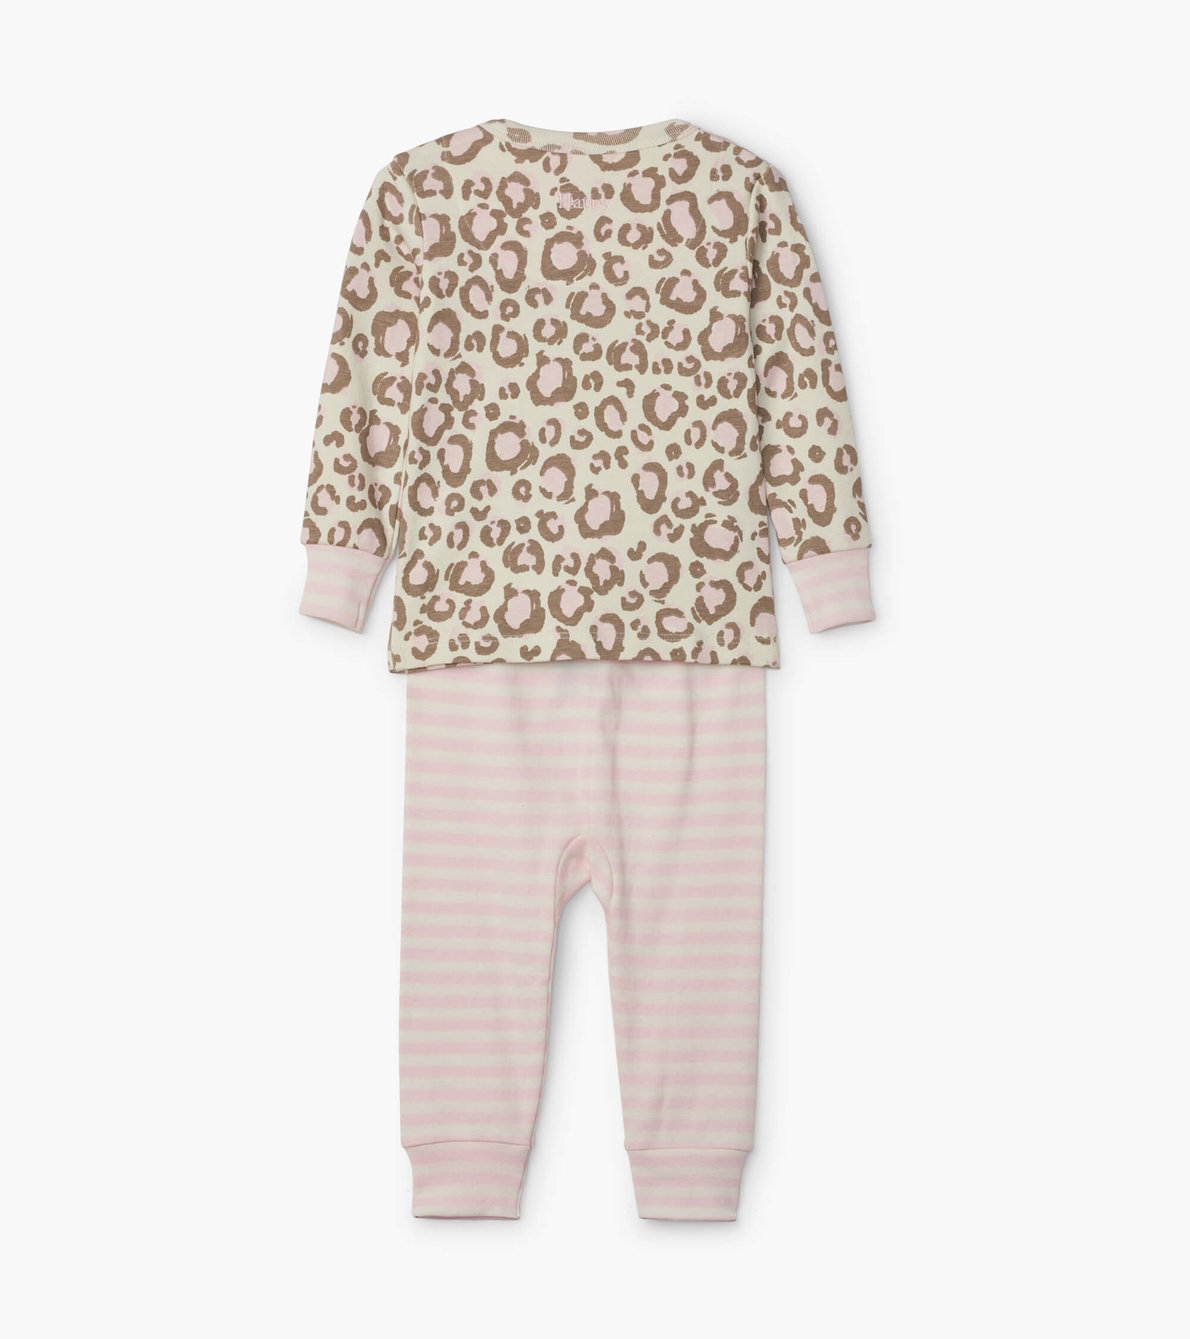 View larger image of Painted Leopard Organic Cotton Baby Pajama Set